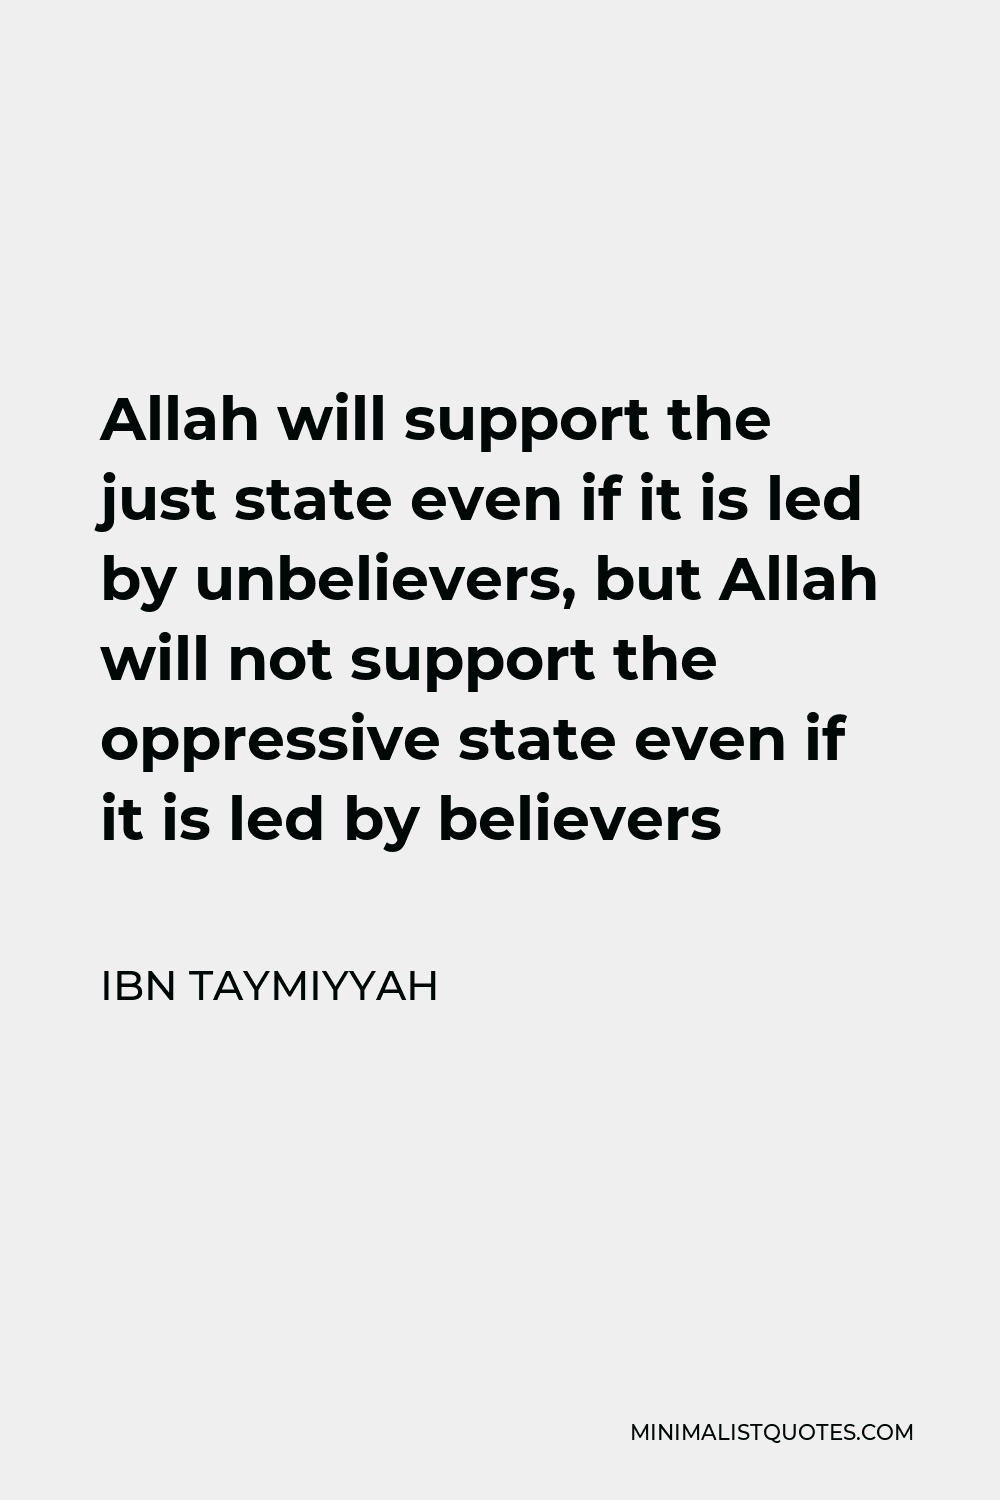 Ibn Taymiyyah Quote - Allah will support the just state even if it is led by unbelievers, but Allah will not support the oppressive state even if it is led by believers